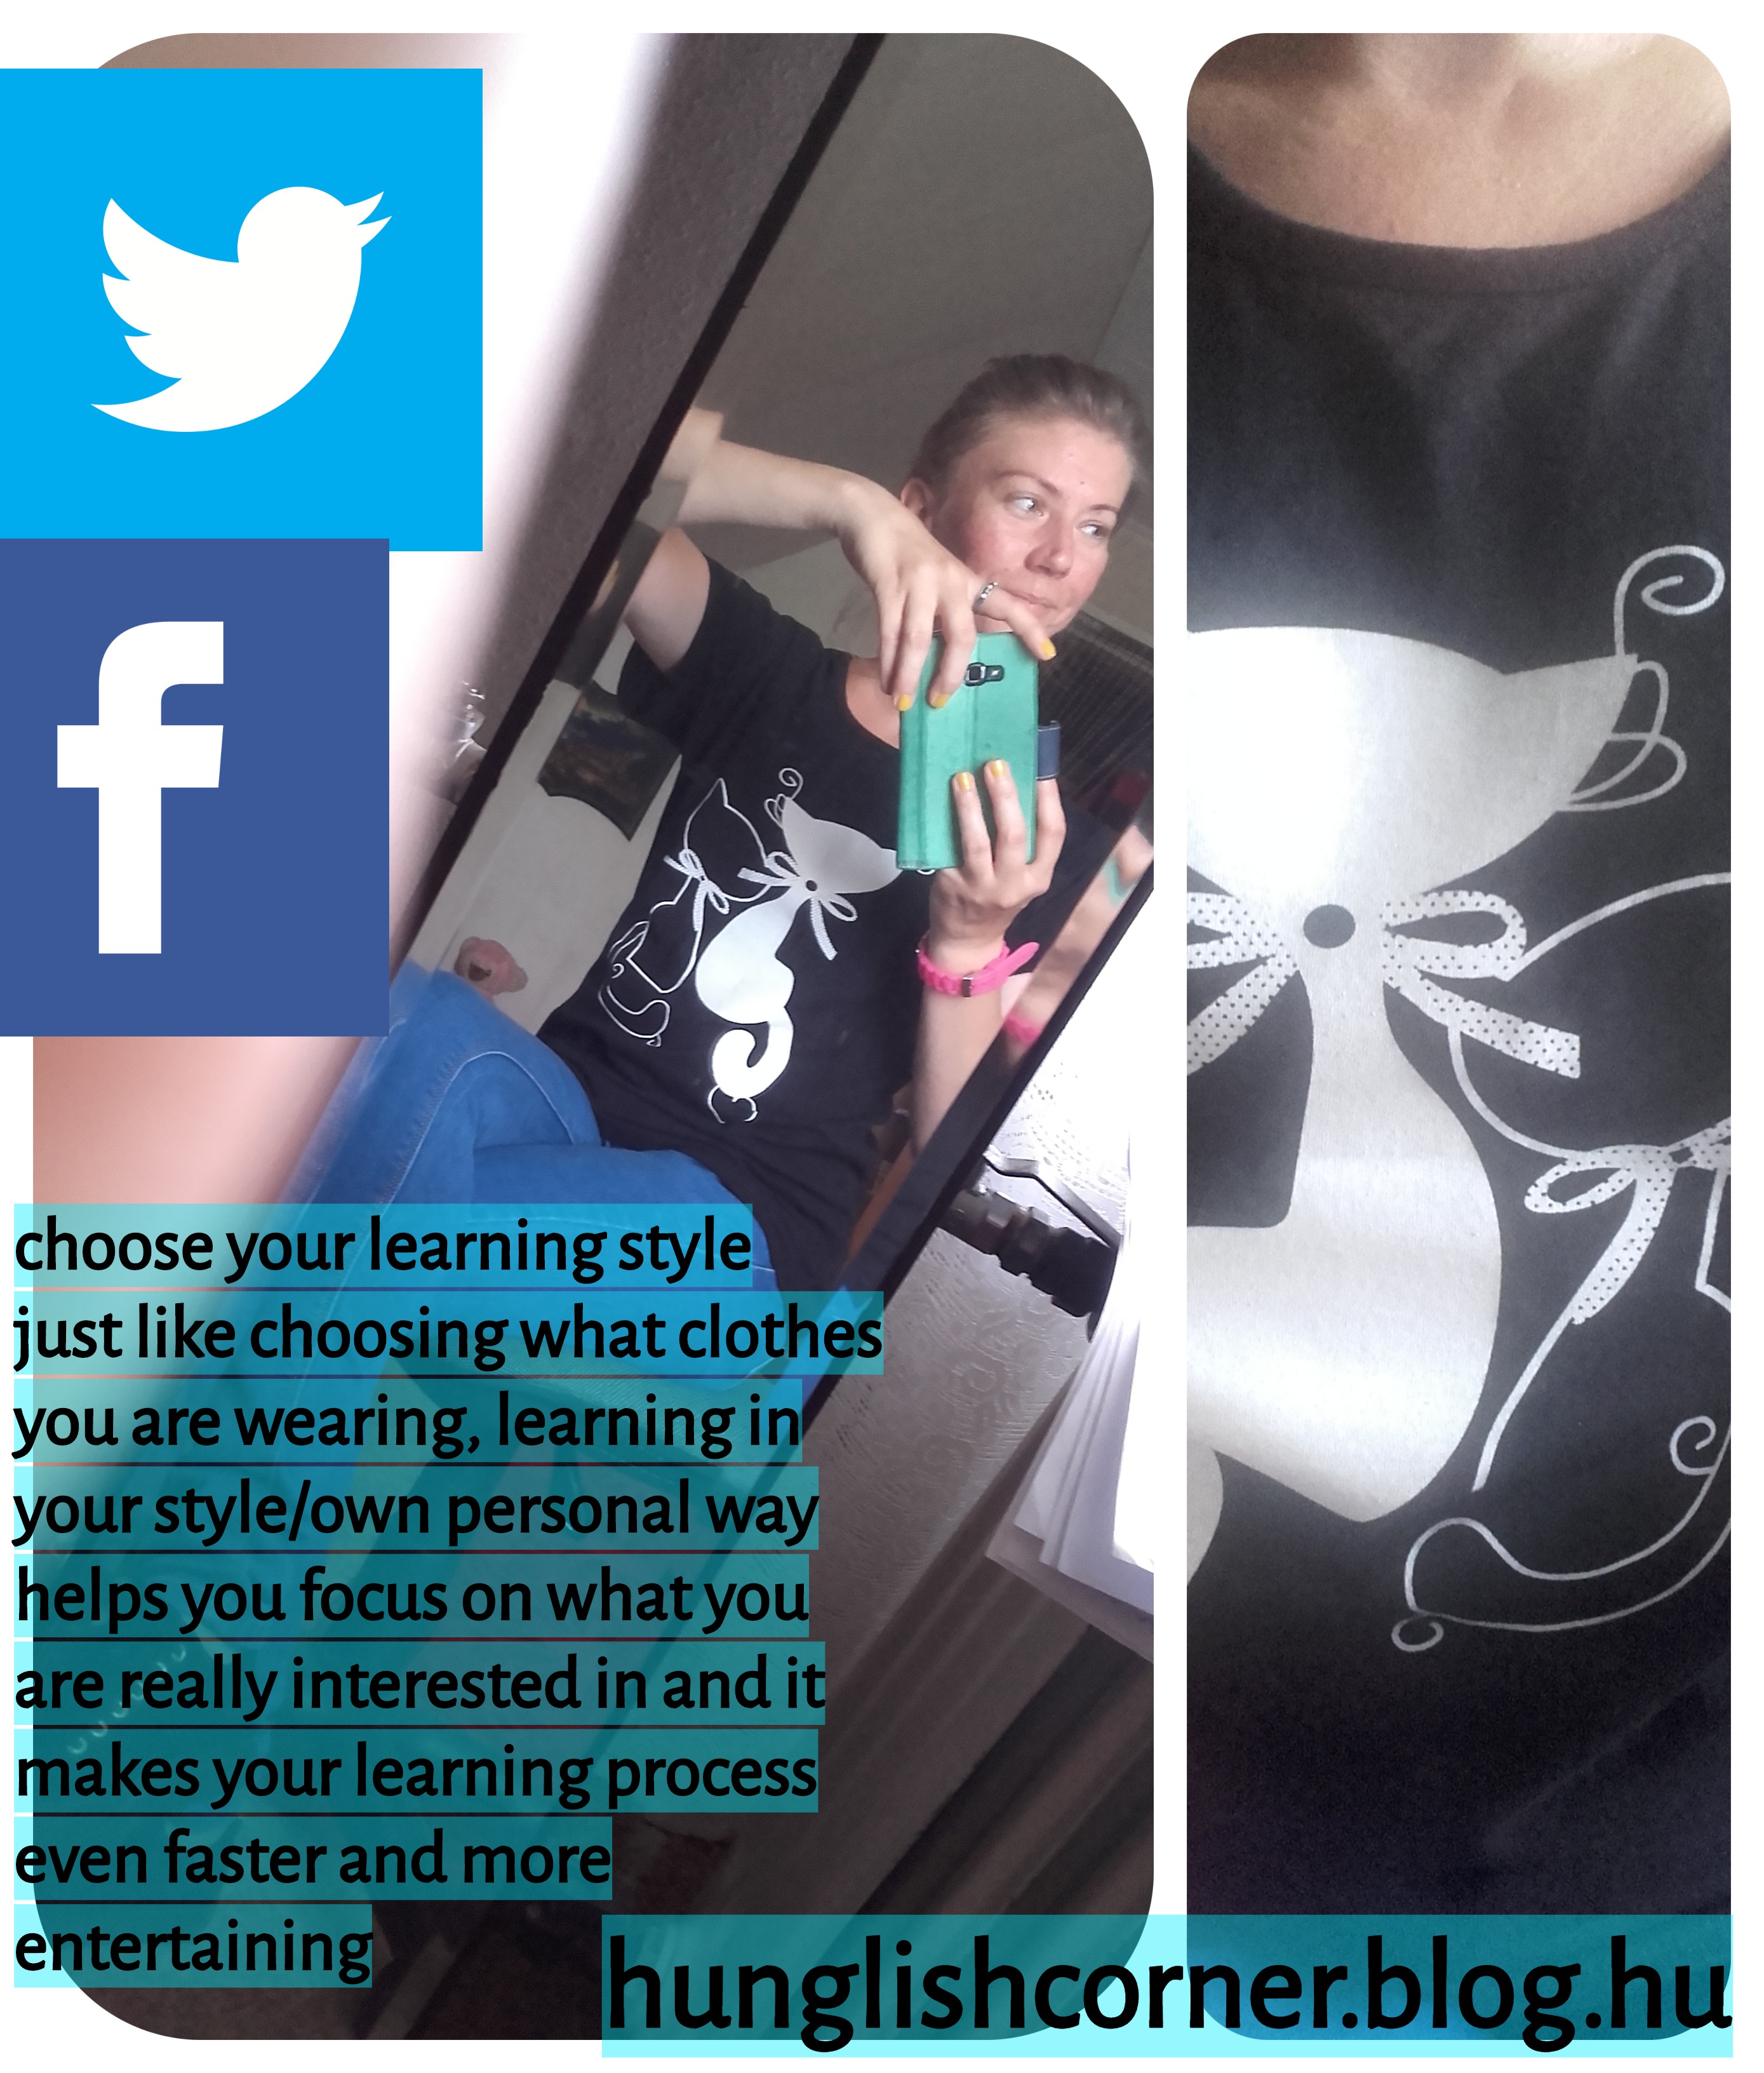 #dress code for learning=curse or blessing?